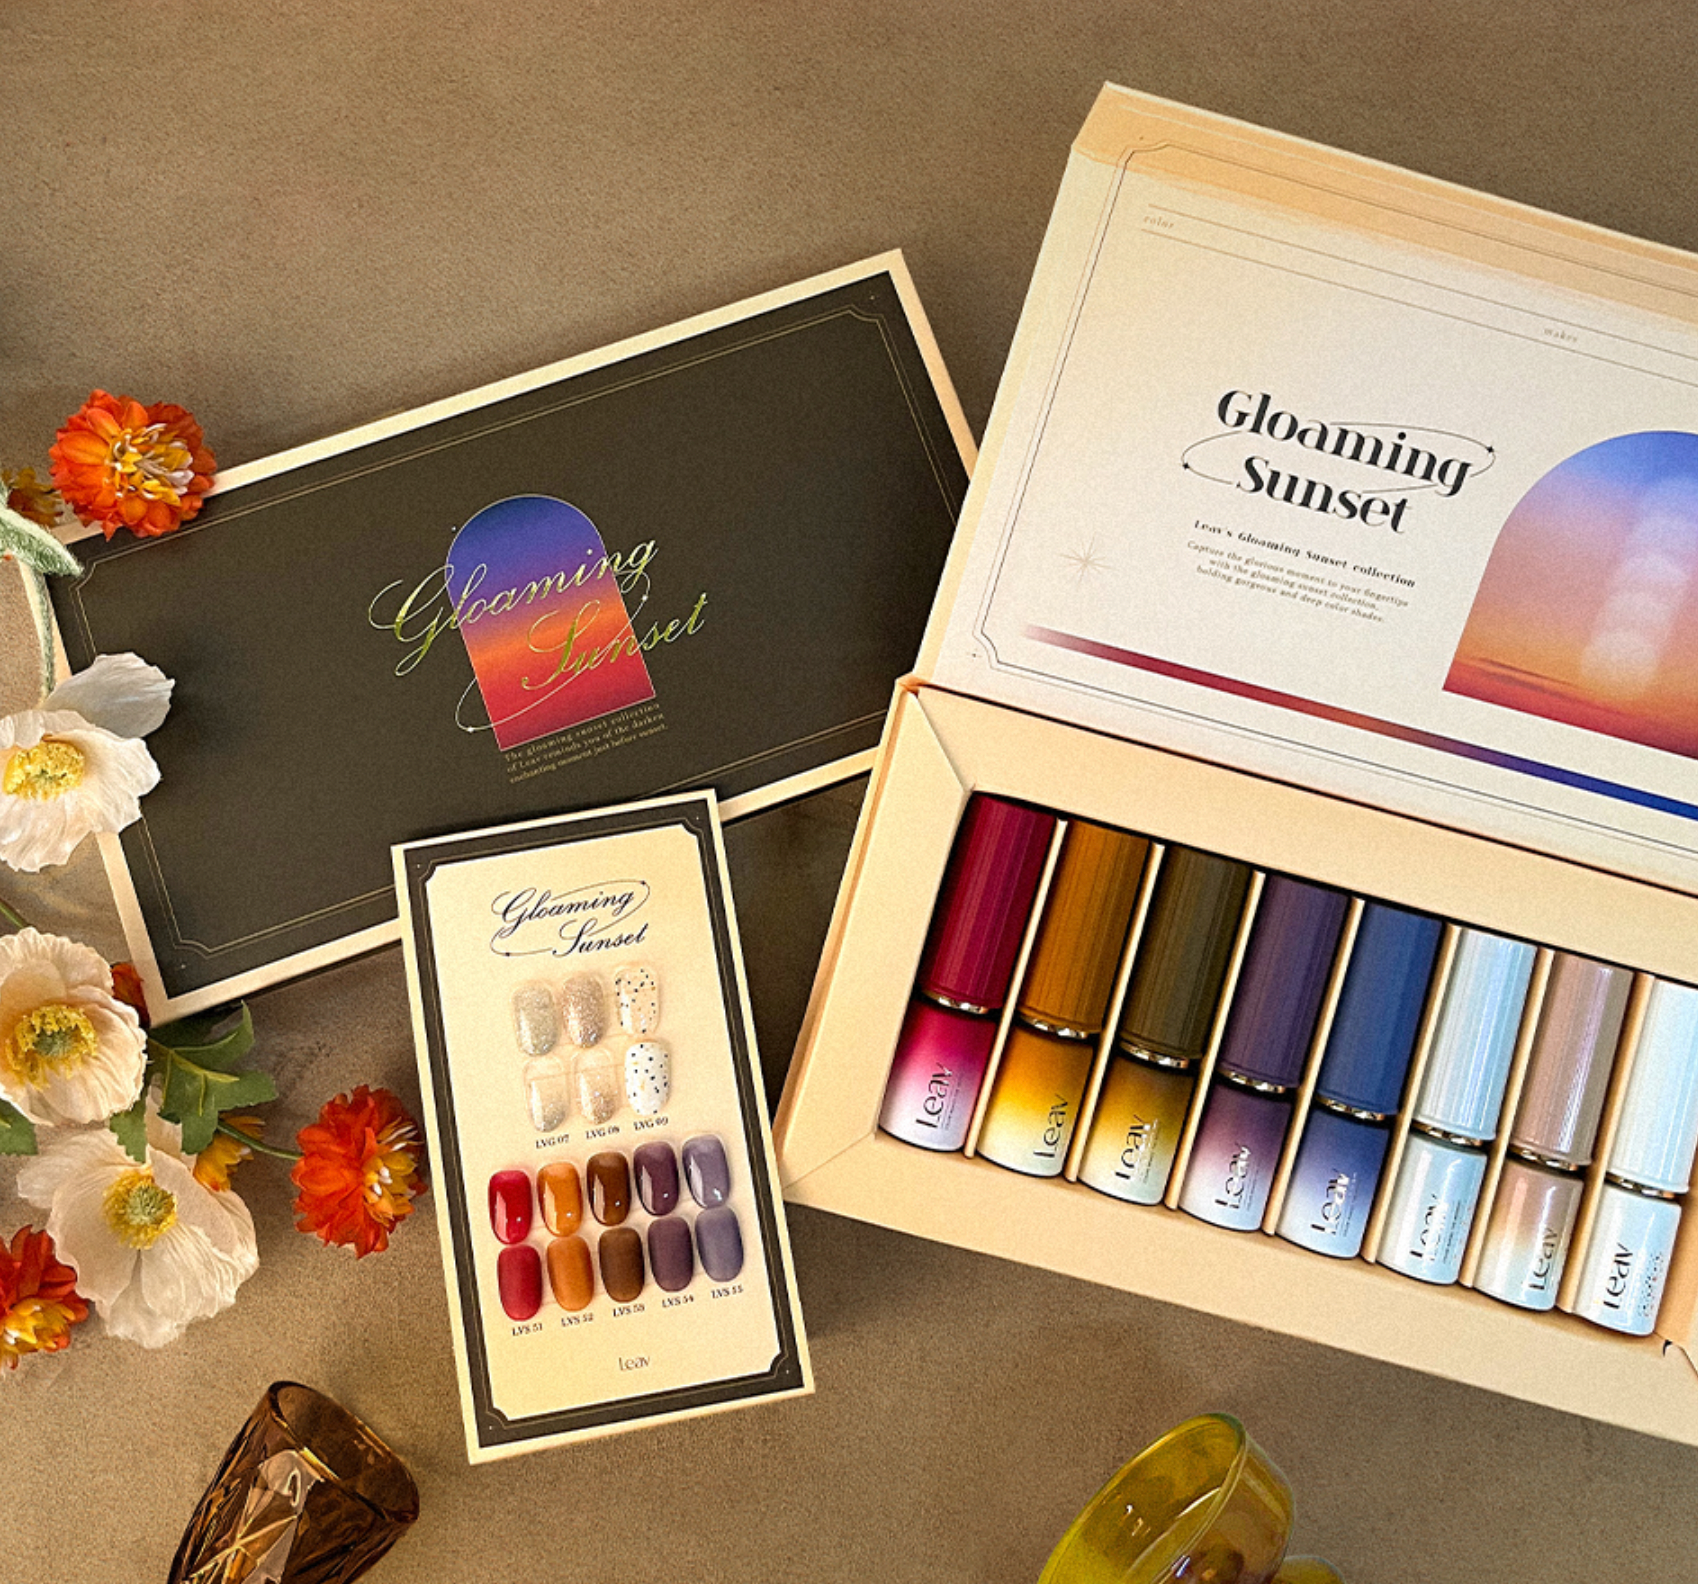 Leav Gloaming sunset - individual/collection